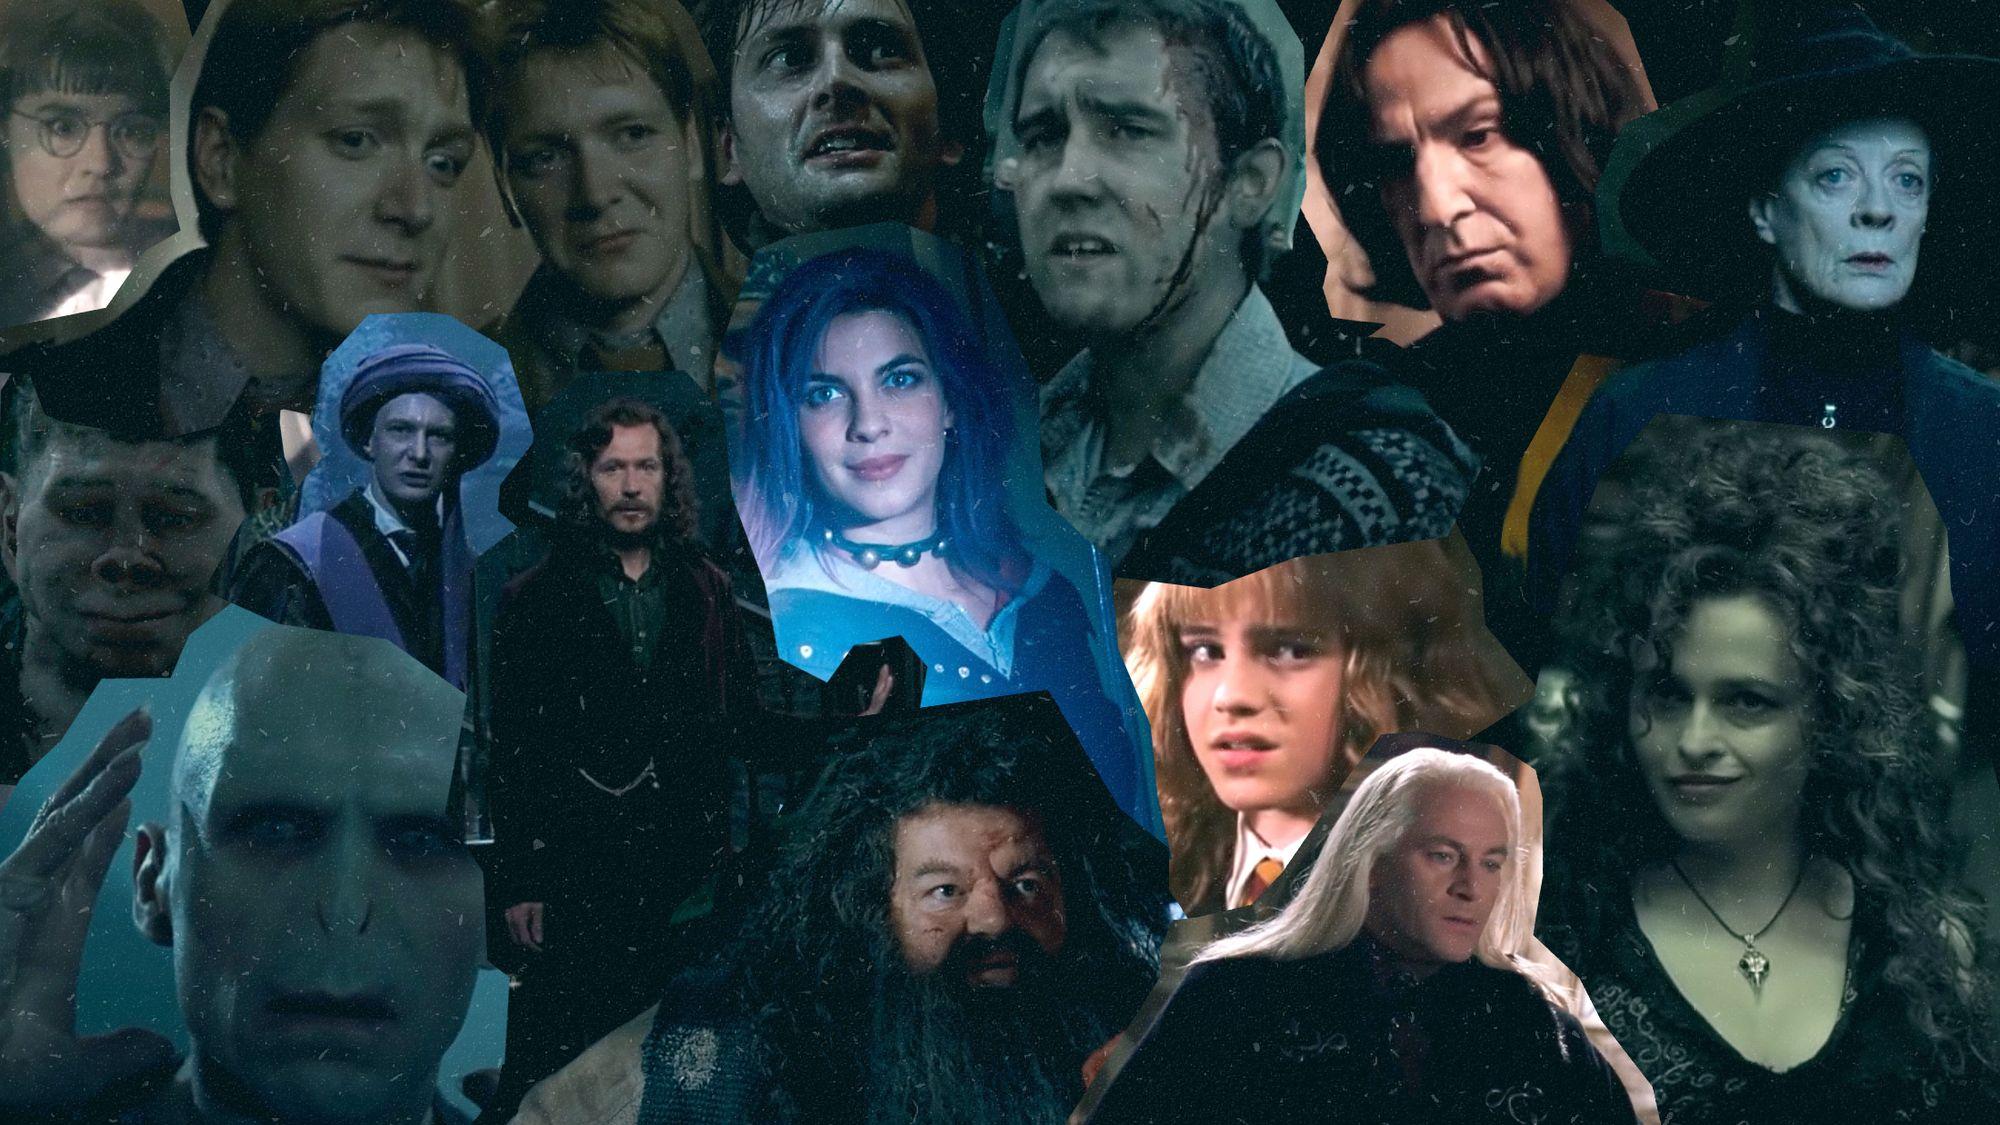                                                                   Harry Potter Characters